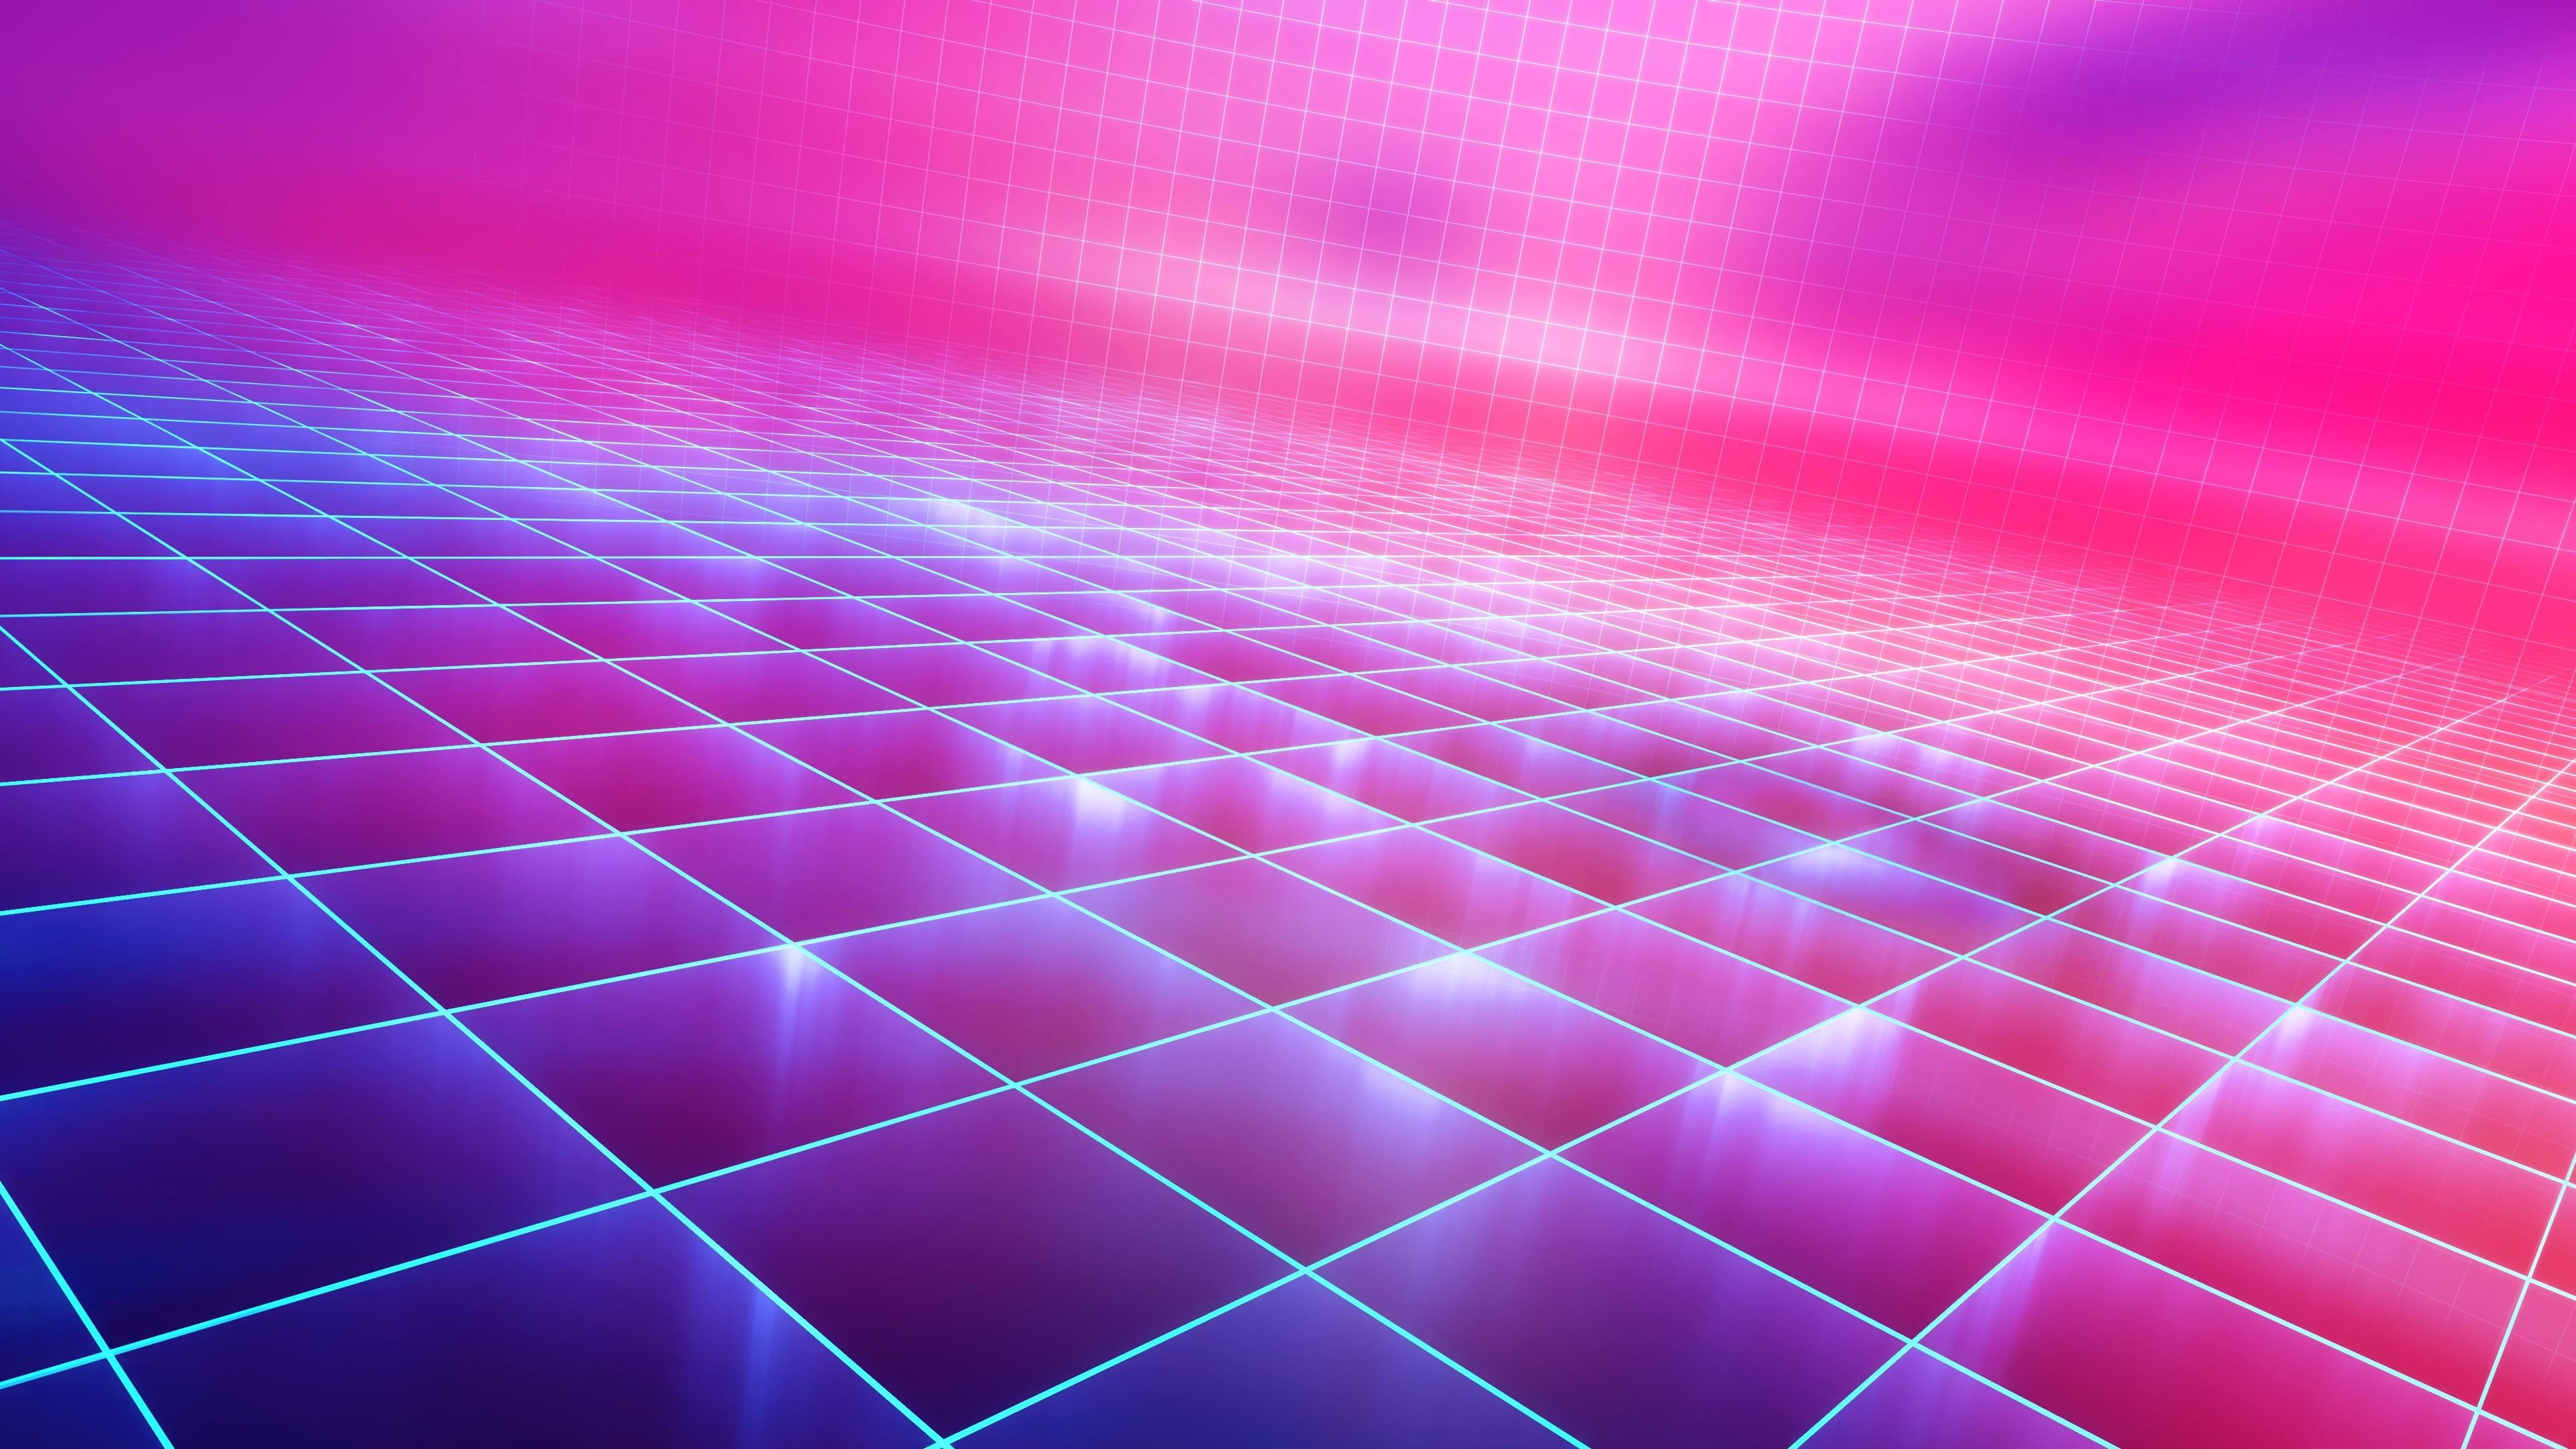 Wallpaper, abstract, grid, pink 3840x2160